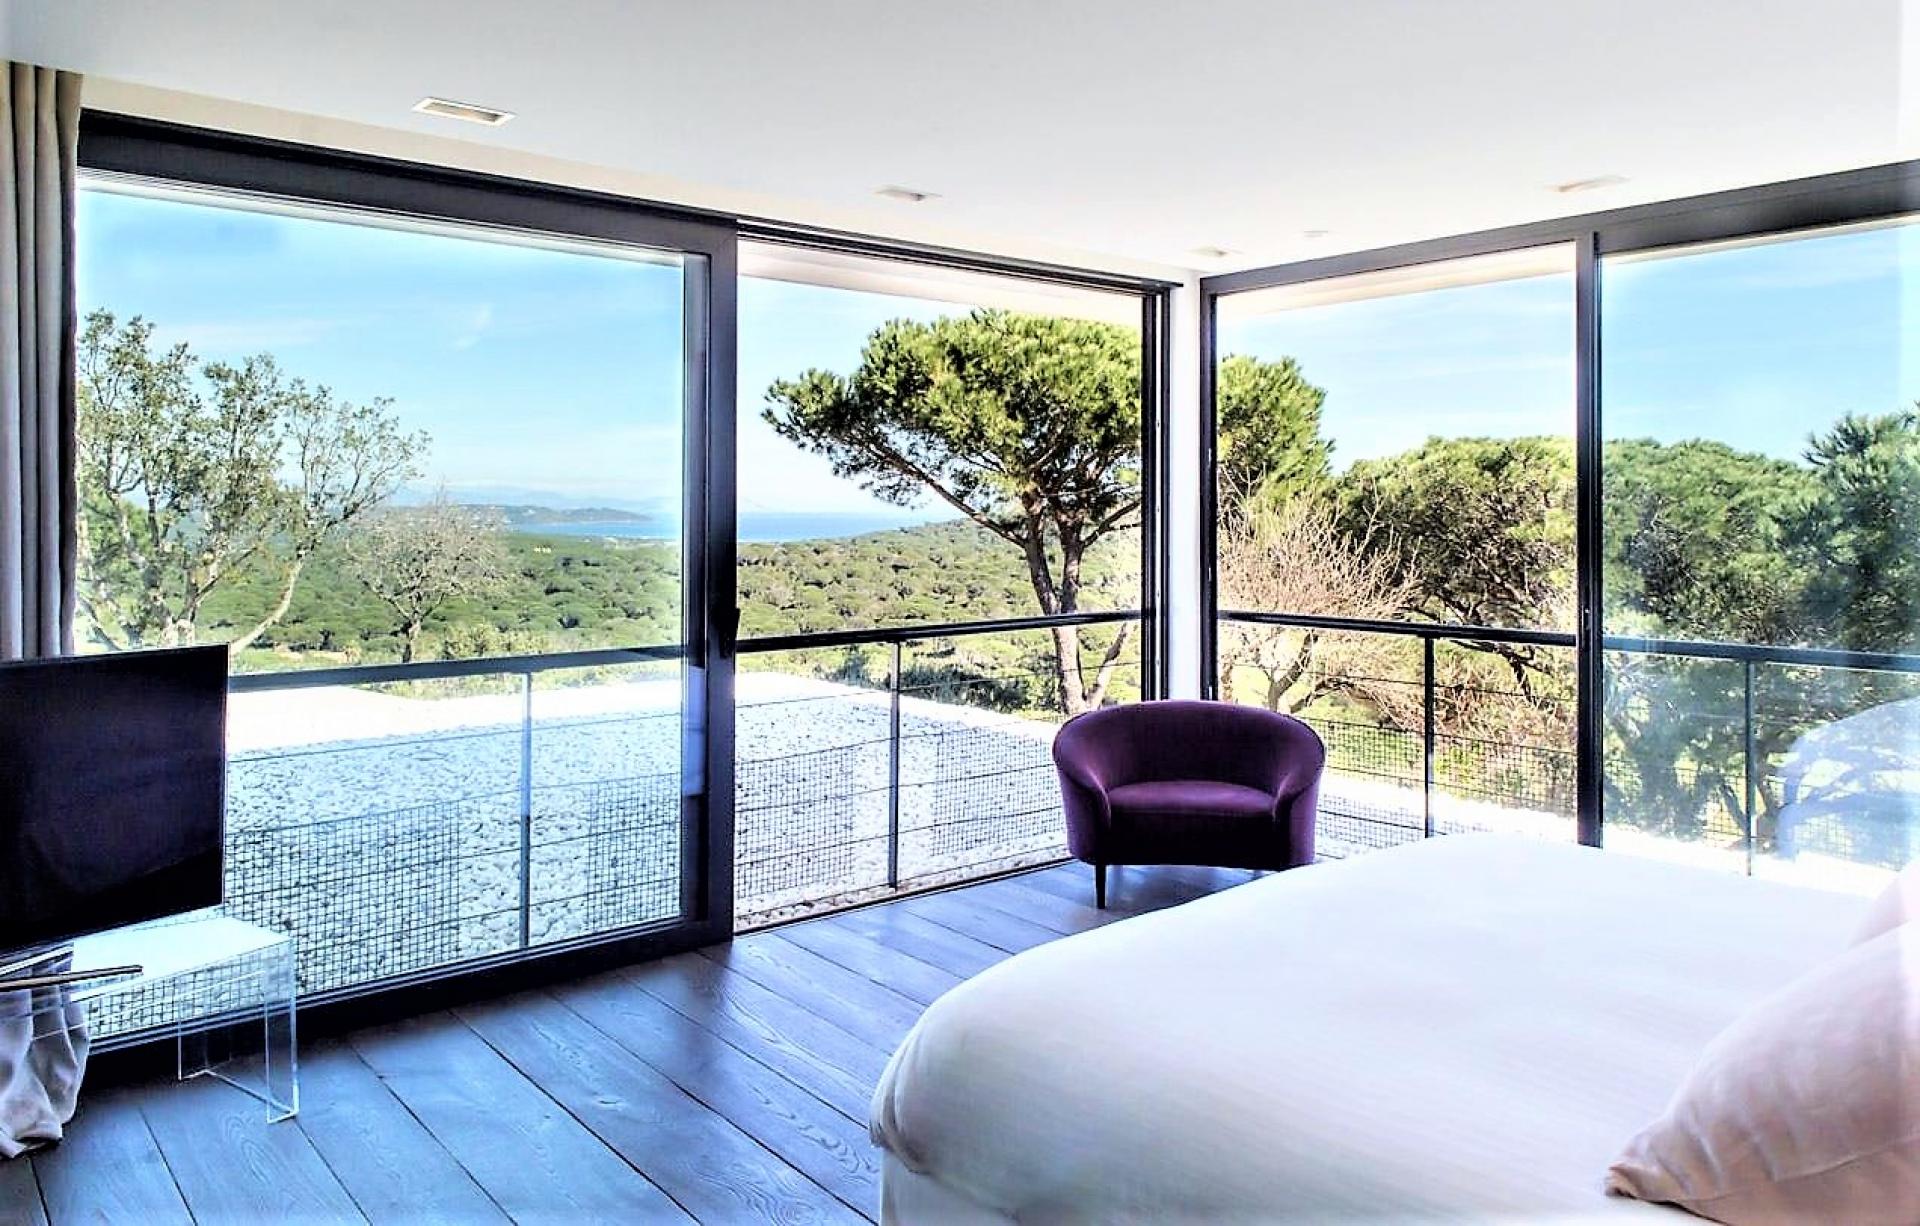 THE LUXURY VILLA DE L'ESCALET HOLIDAY RENTAL IN ST TROPEZ WITH STAGGERING SEA VIEW